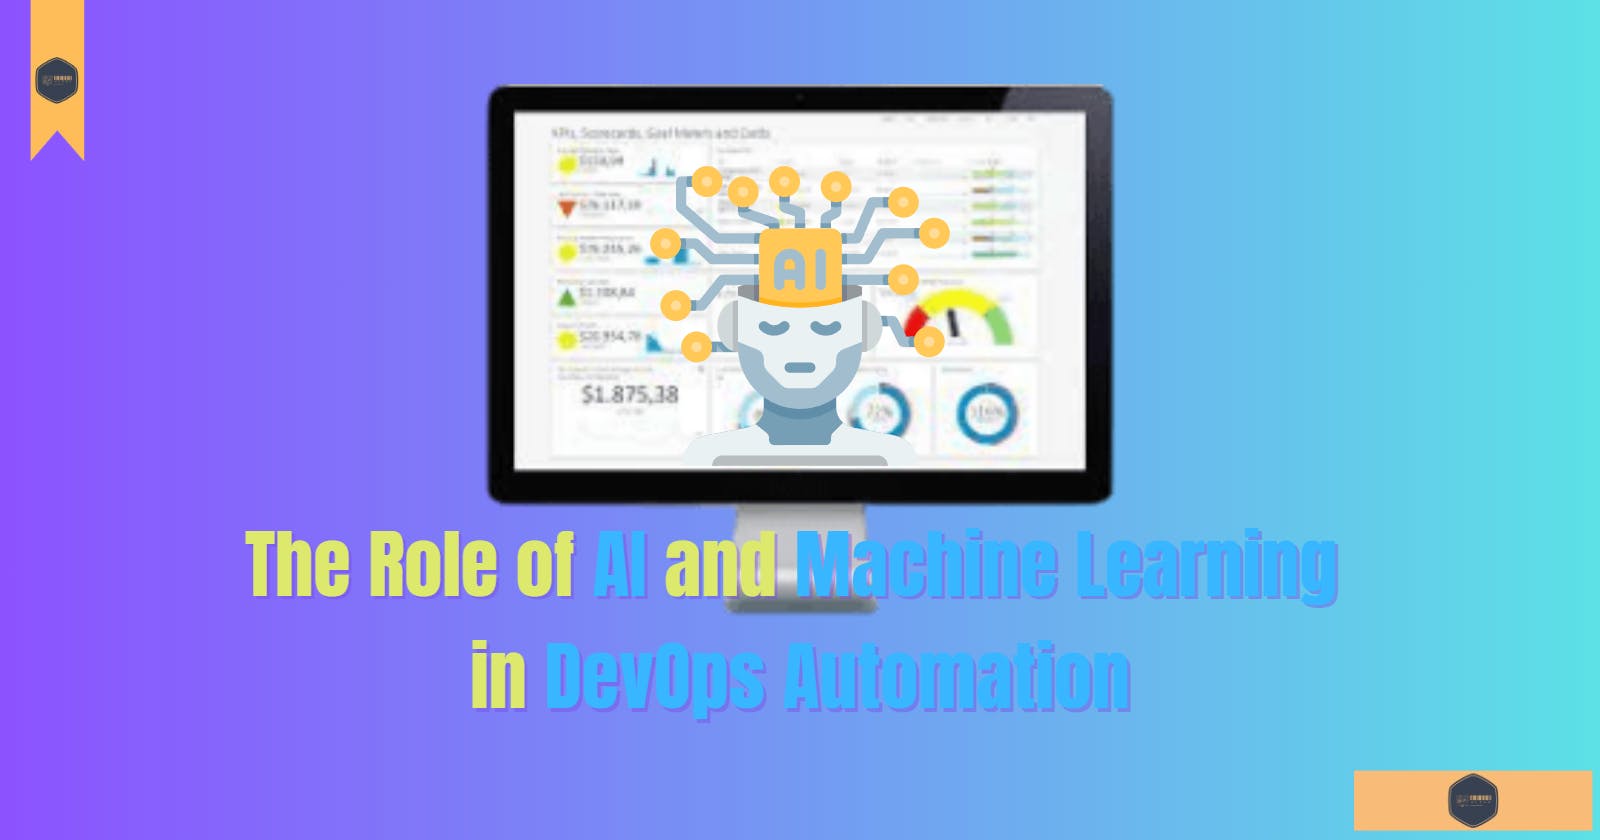 The Role of AI and Machine Learning in DevOps Automation